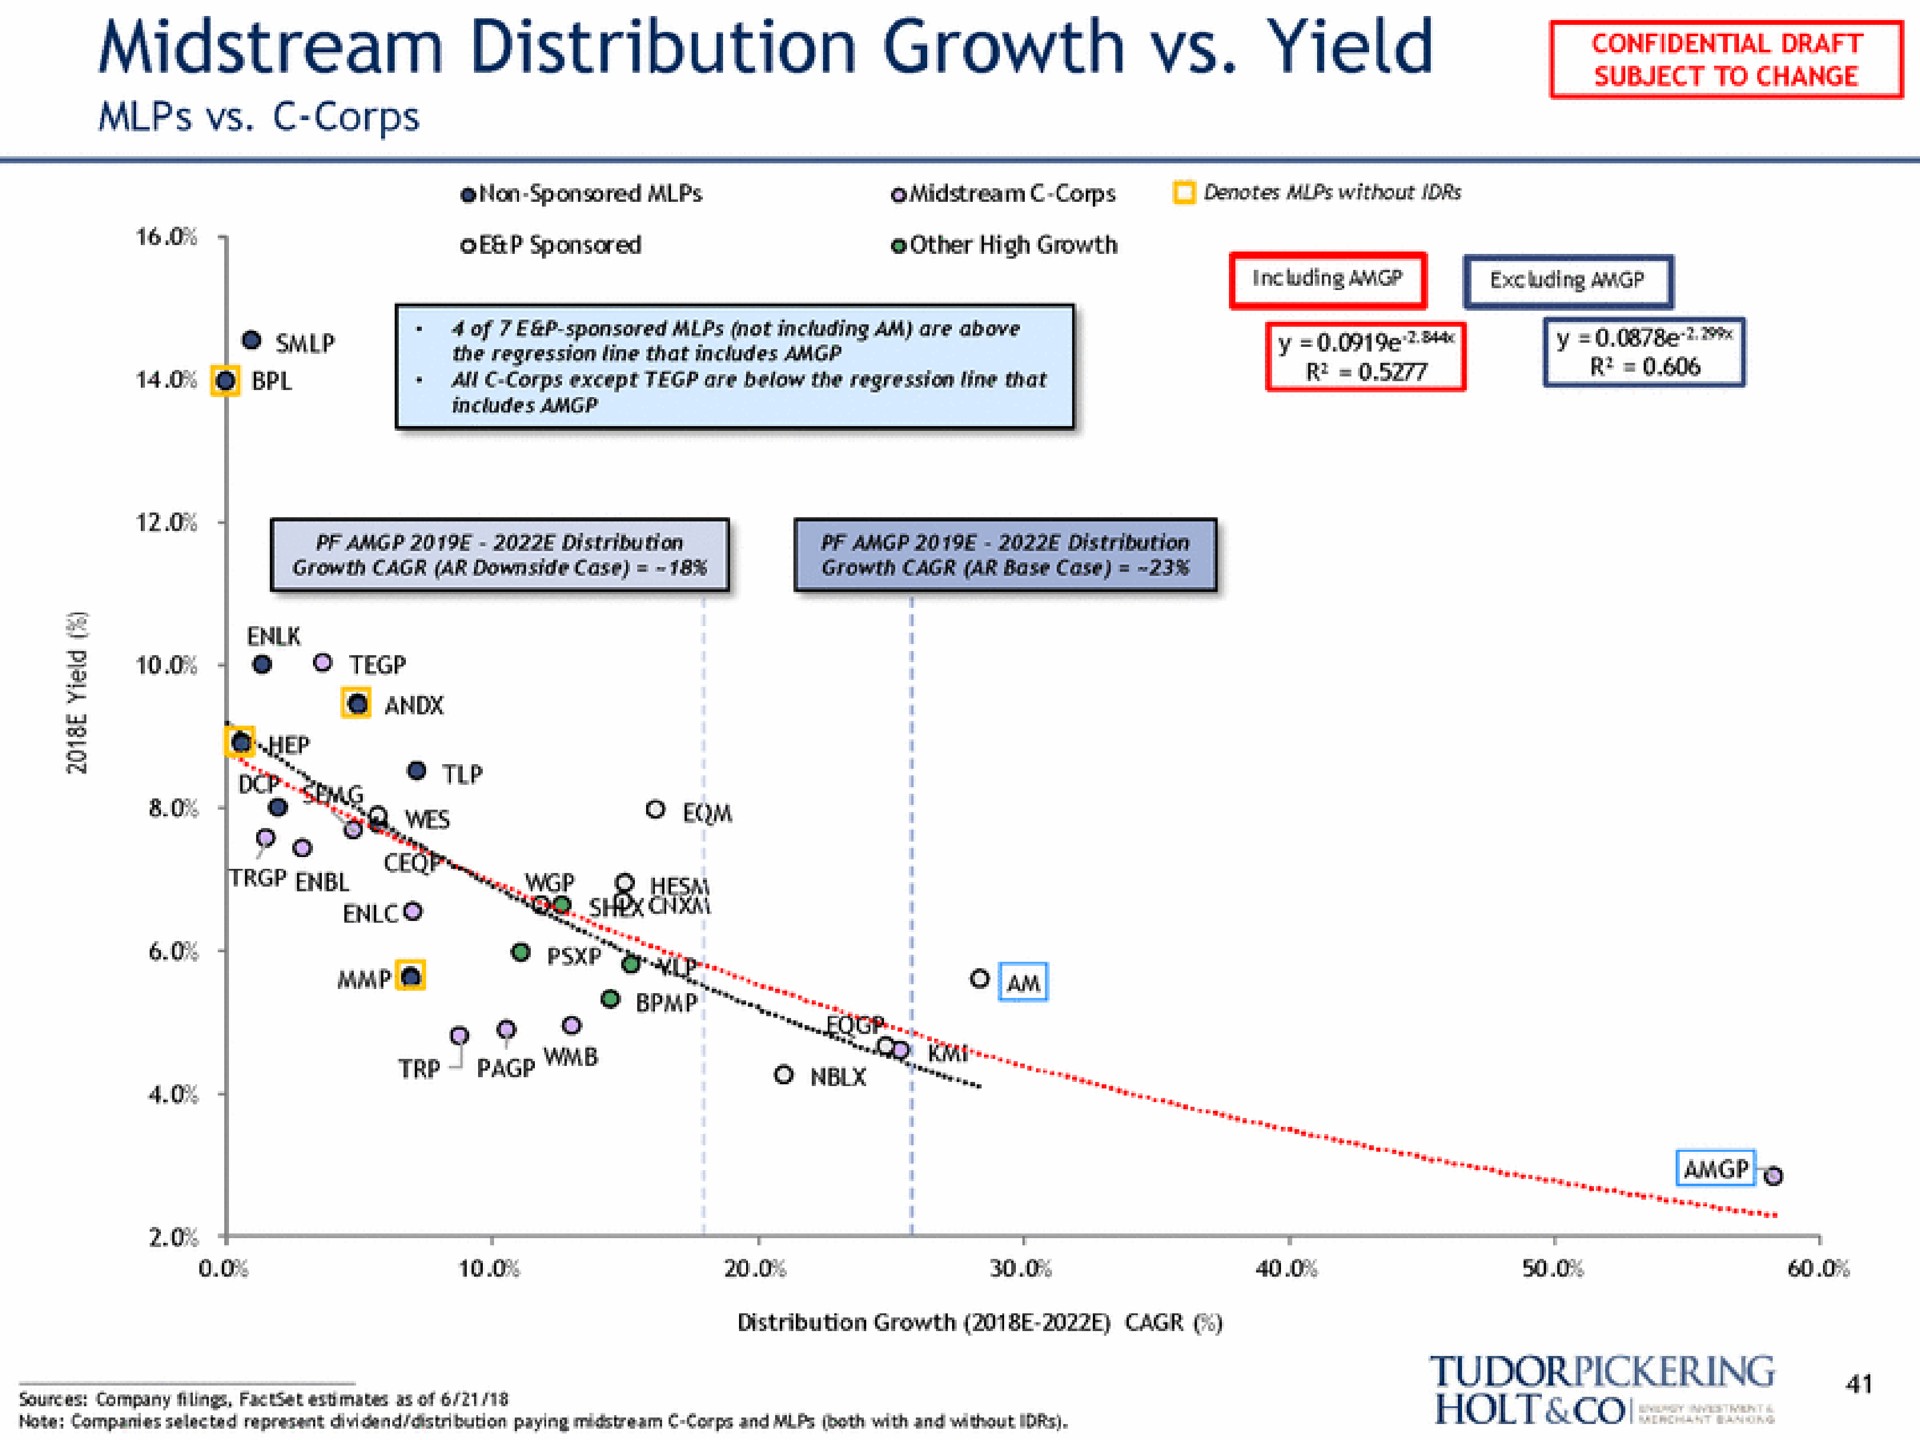 midstream distribution growth yield pace ring | Tudor, Pickering, Holt & Co